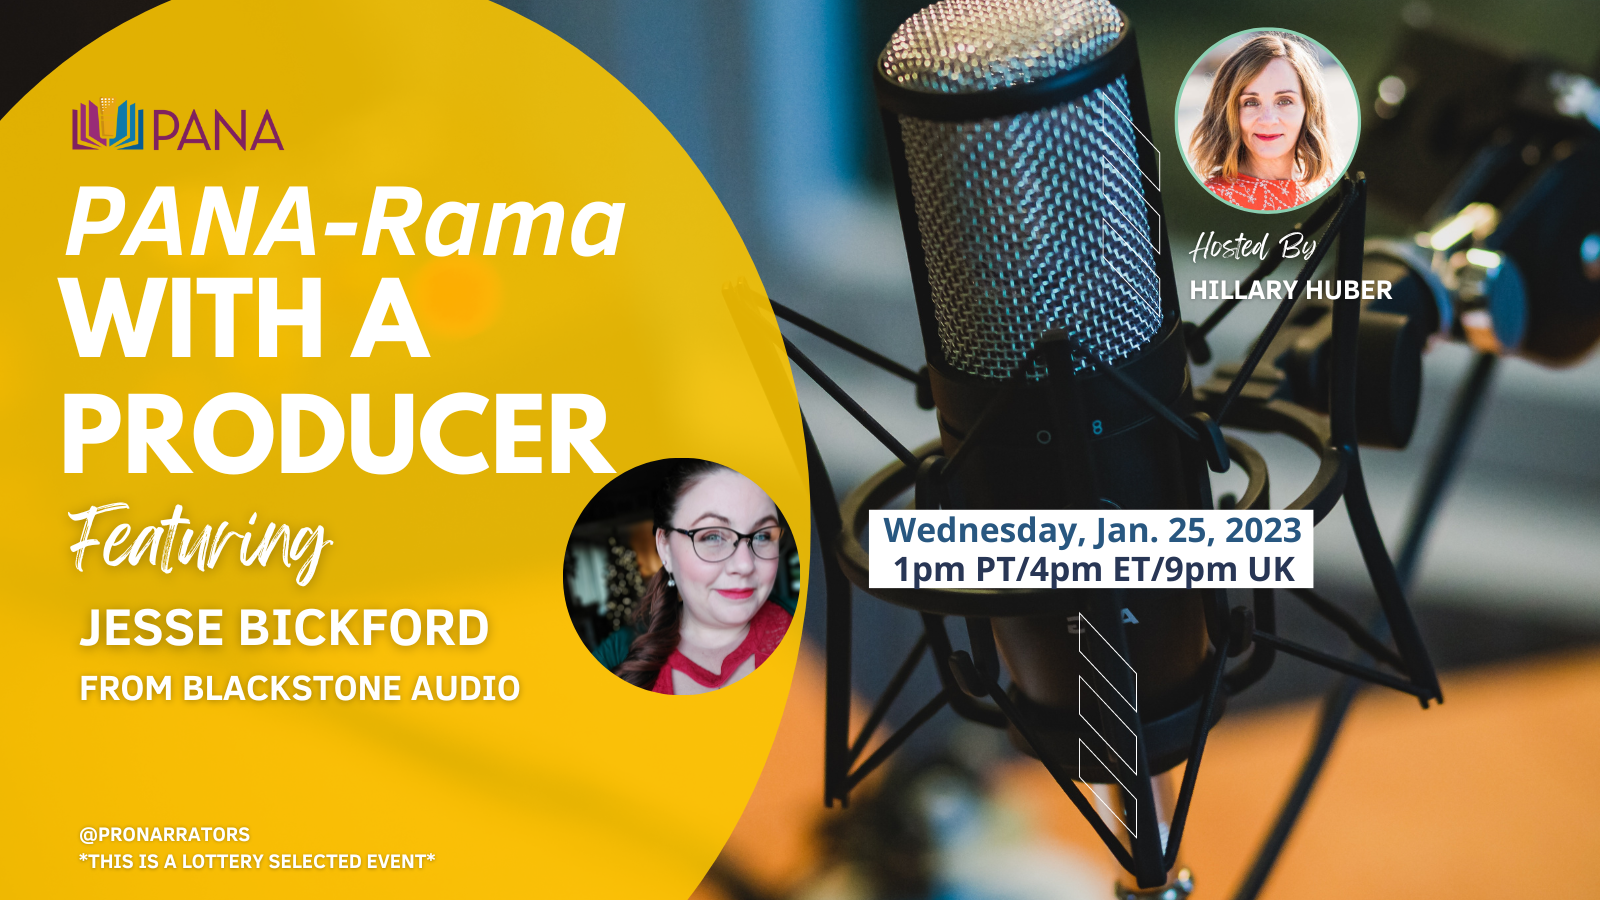 PANA-Rama with a Producer graphic featuring Jesse Bickford of Blackstone Audio on Jan 25, 2023 at 1 pm PT / 4pm ET / 9pm UK.